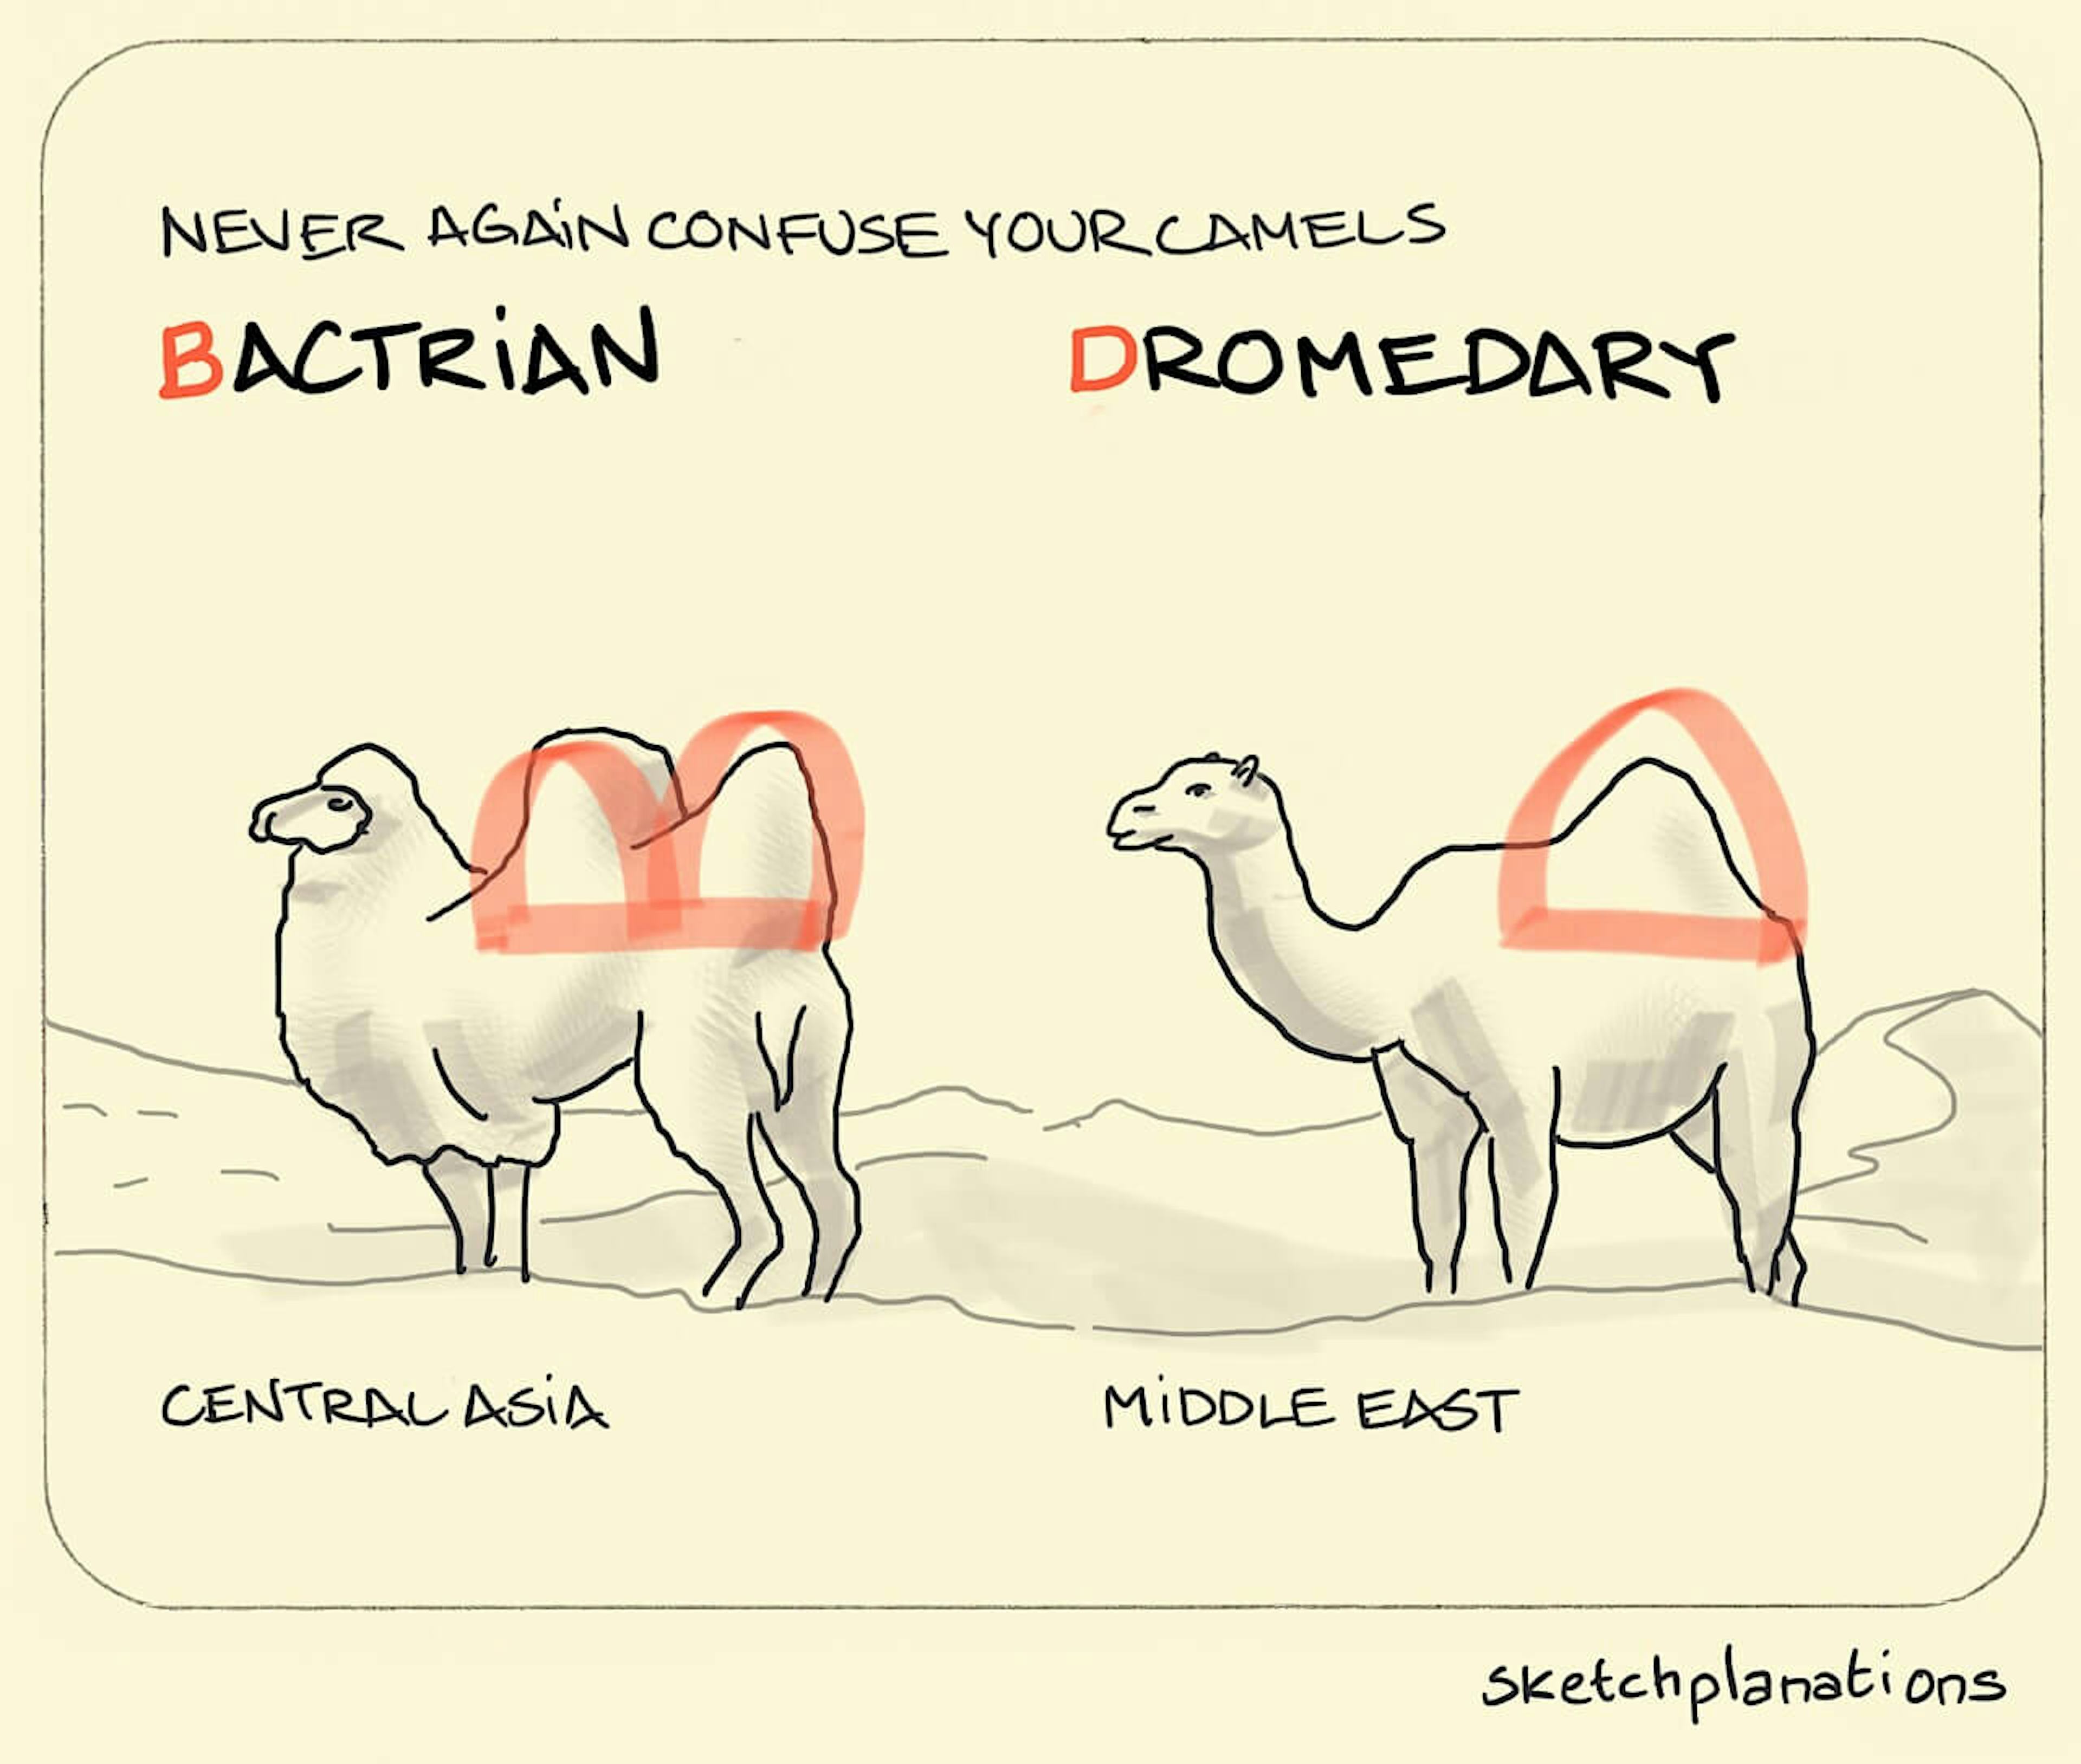 How to identify a Bactrian or Dromedary Camel: The Bactrian camel (on the left) has 2 humps like the capital letter B turned on its side. The Dromedary camel has 1 hump (on the right) like the capital letter D turned on its side. If you can count the humps, you know the first letter. 